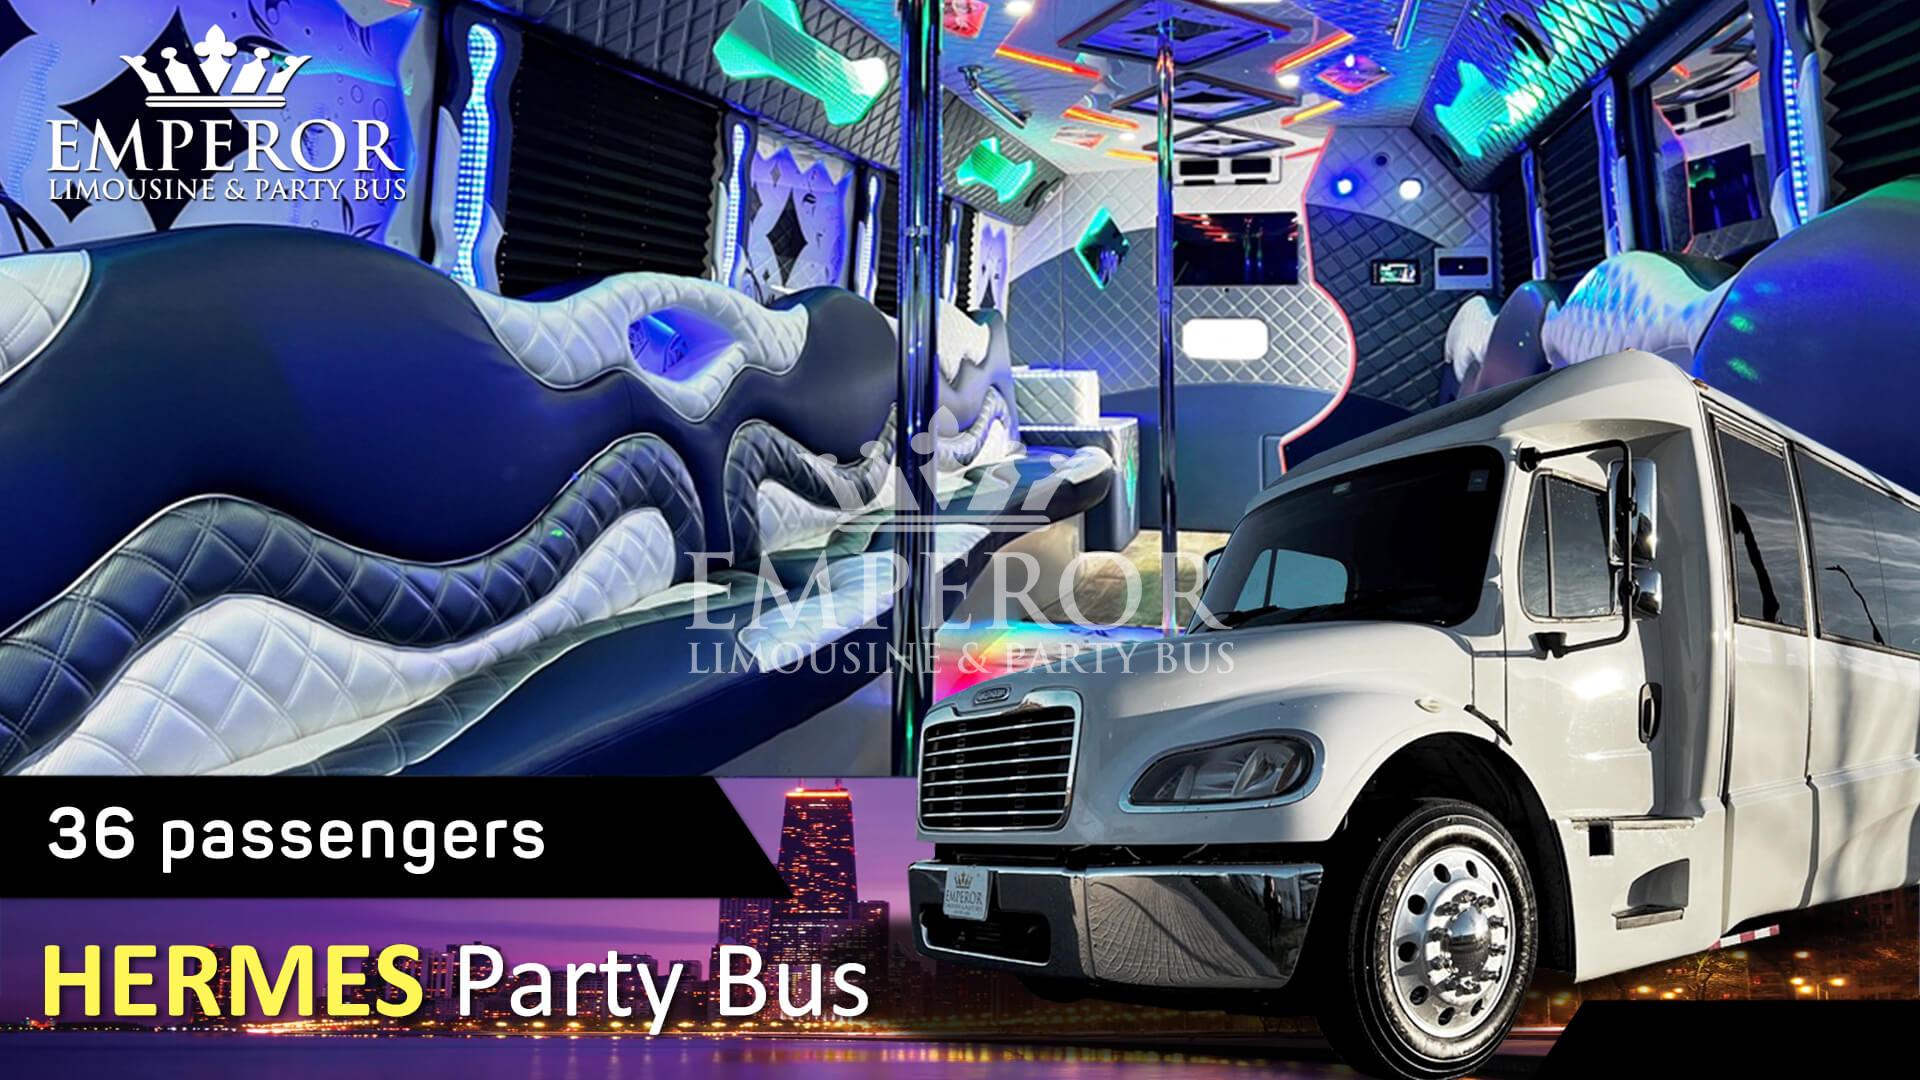 Party bus rental in Broadview, IL - Hermes Edition